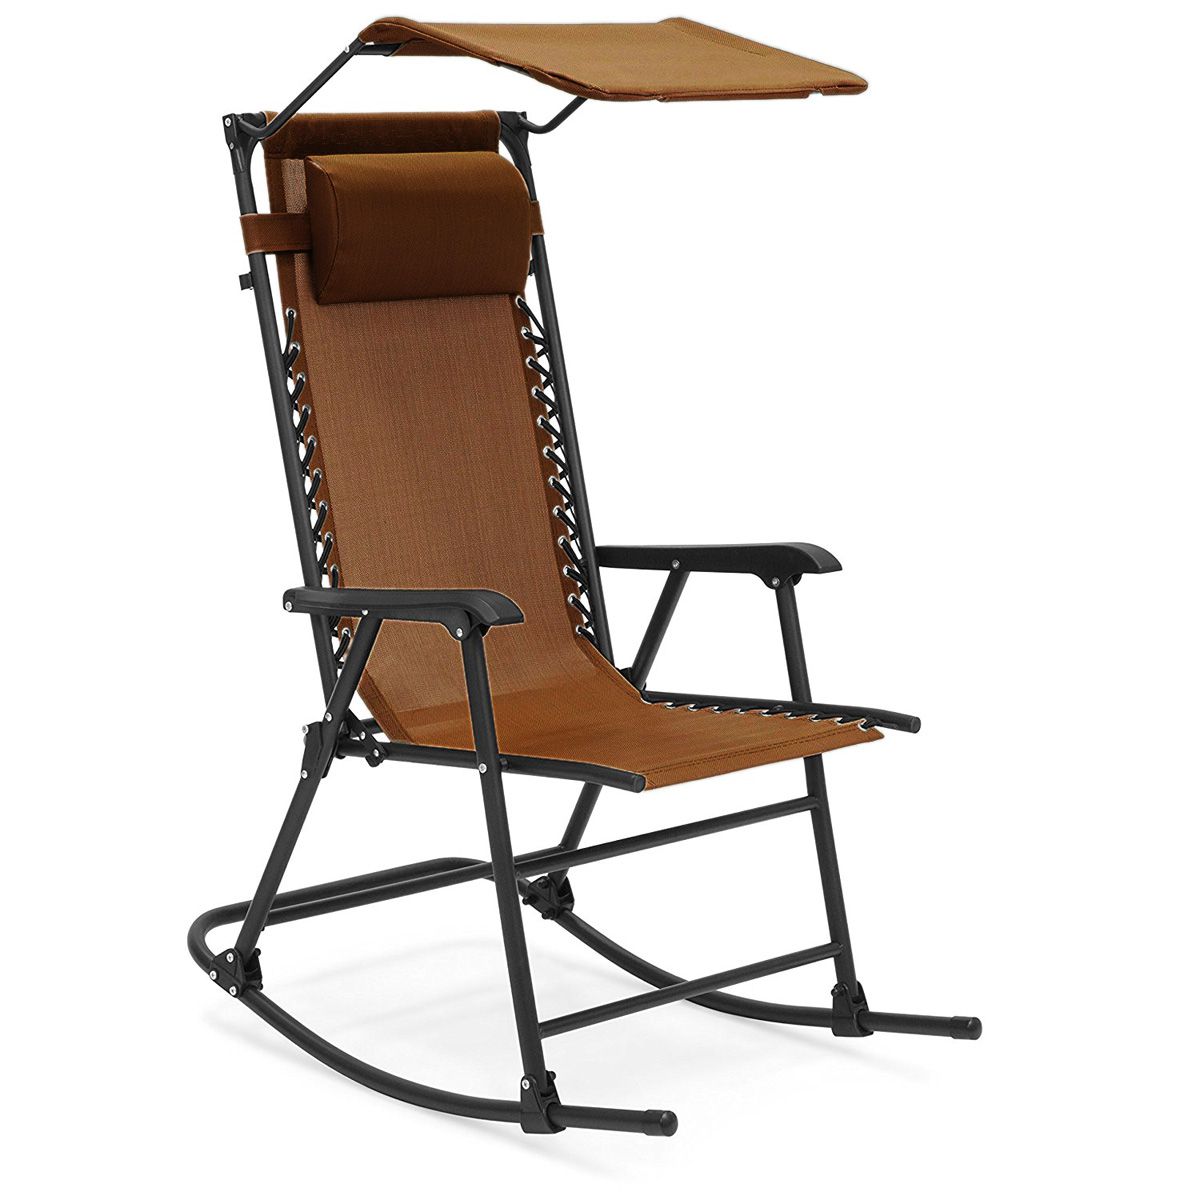 Folding Rocking Chair Portable Outdoor, Fold Up Rocking Chair With Canopy